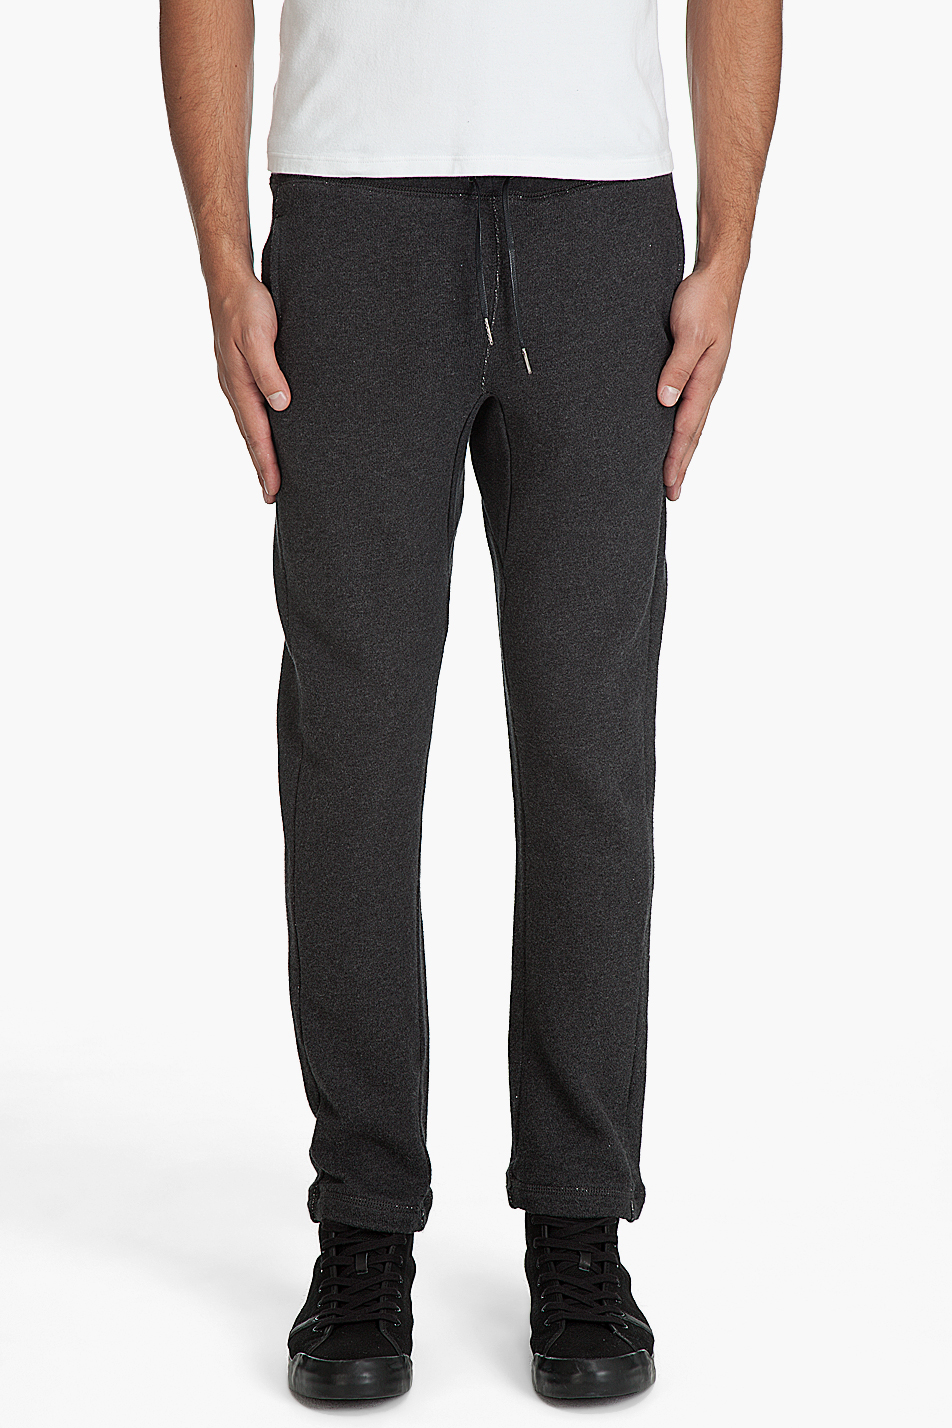 T By Alexander Wang French Terry Sweatpants in Gray for Men (charcoal ...